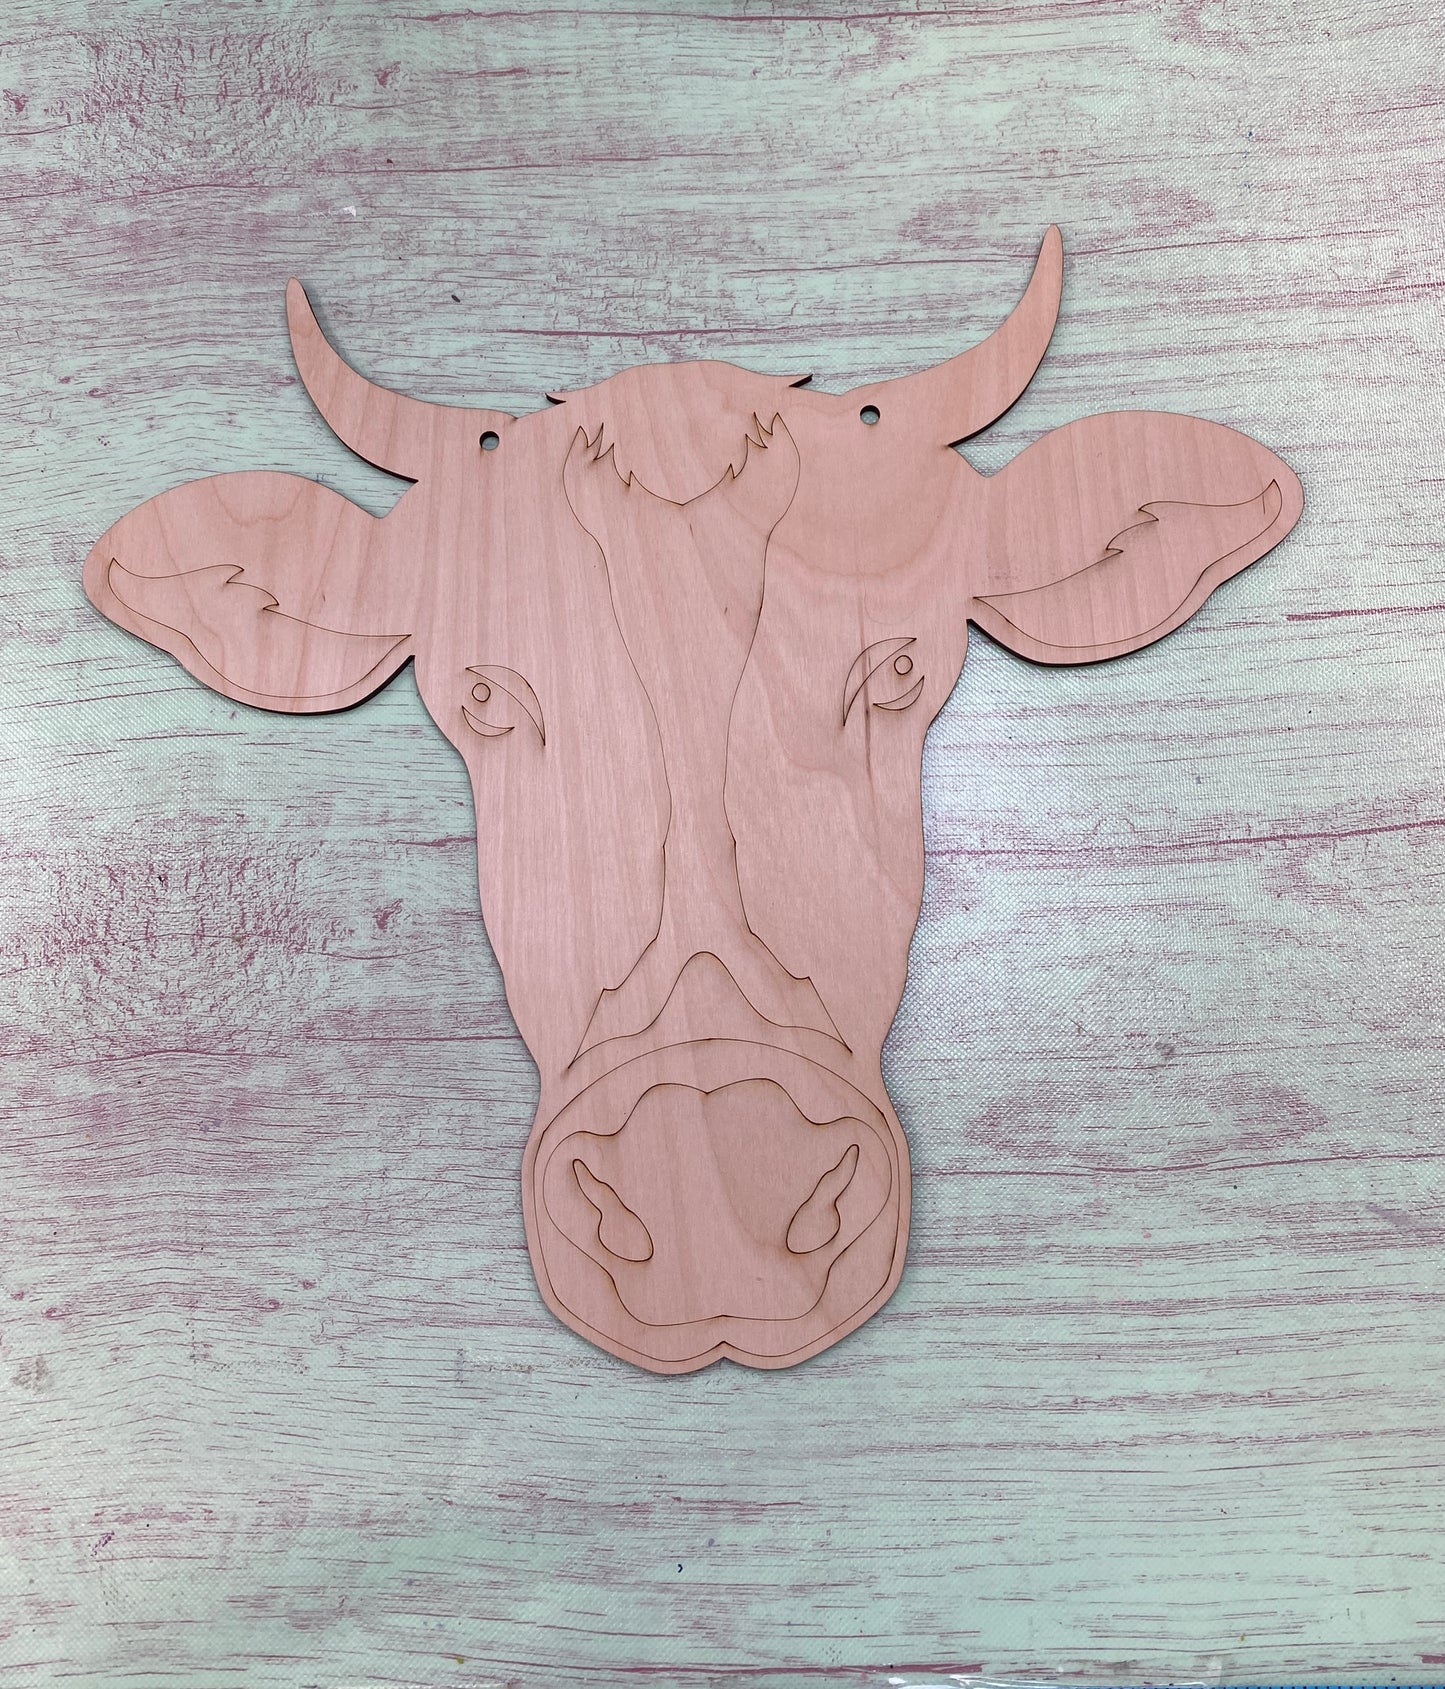 Cow and Bull Head Silhouette Wooden Laser Cut Out Blank